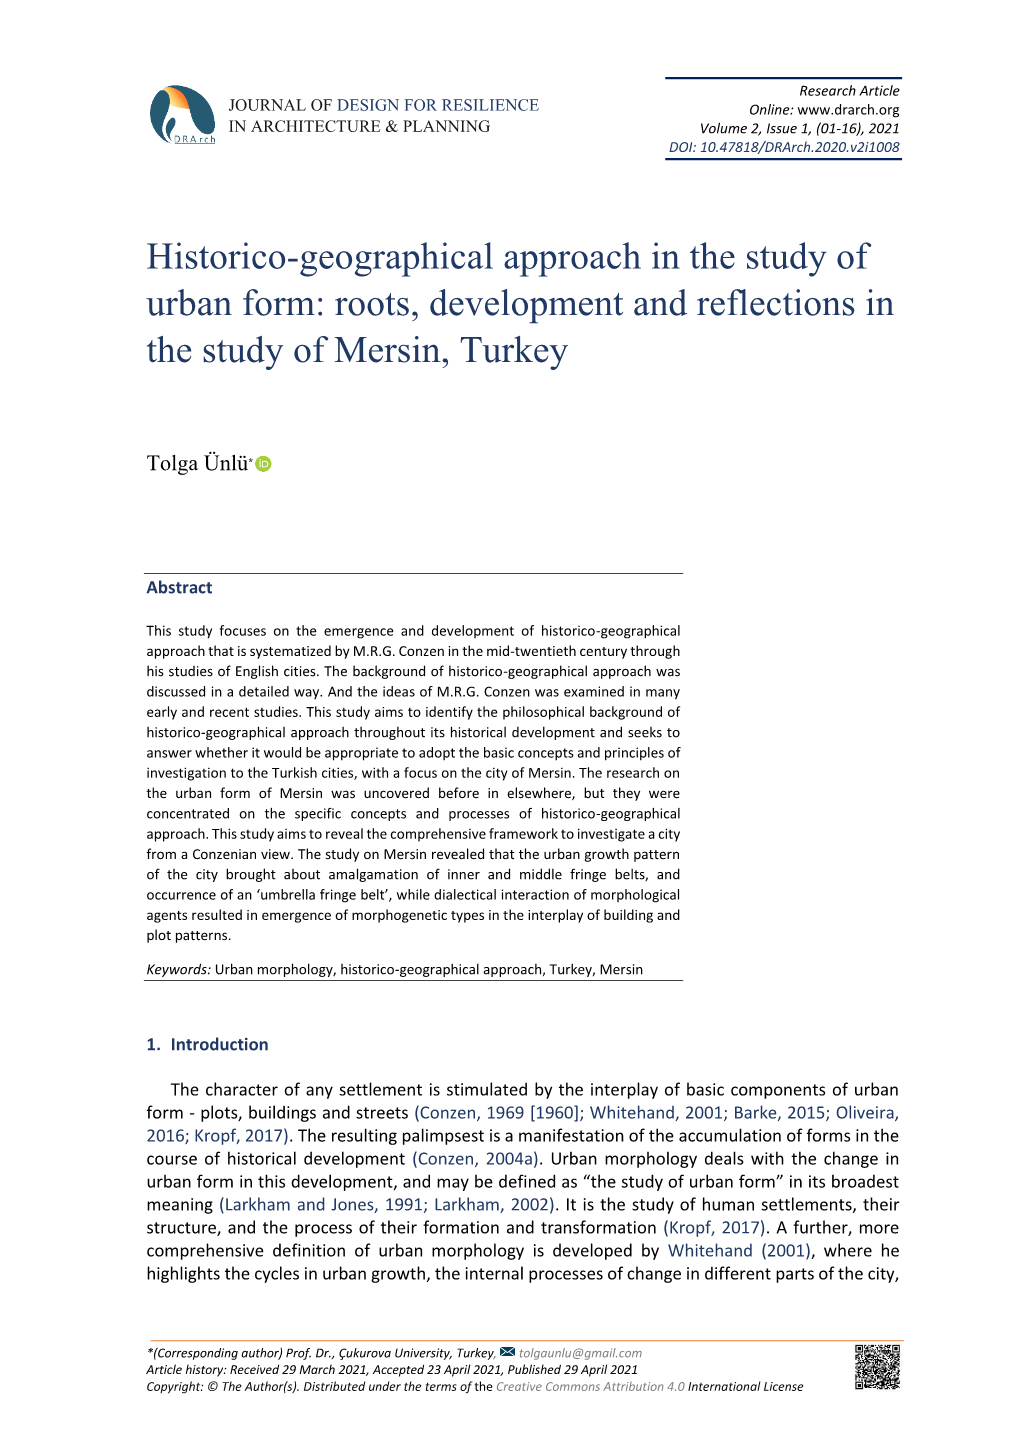 Historico-Geographical Approach in the Study of Urban Form: Roots, Development and Reflections in the Study of Mersin, Turkey